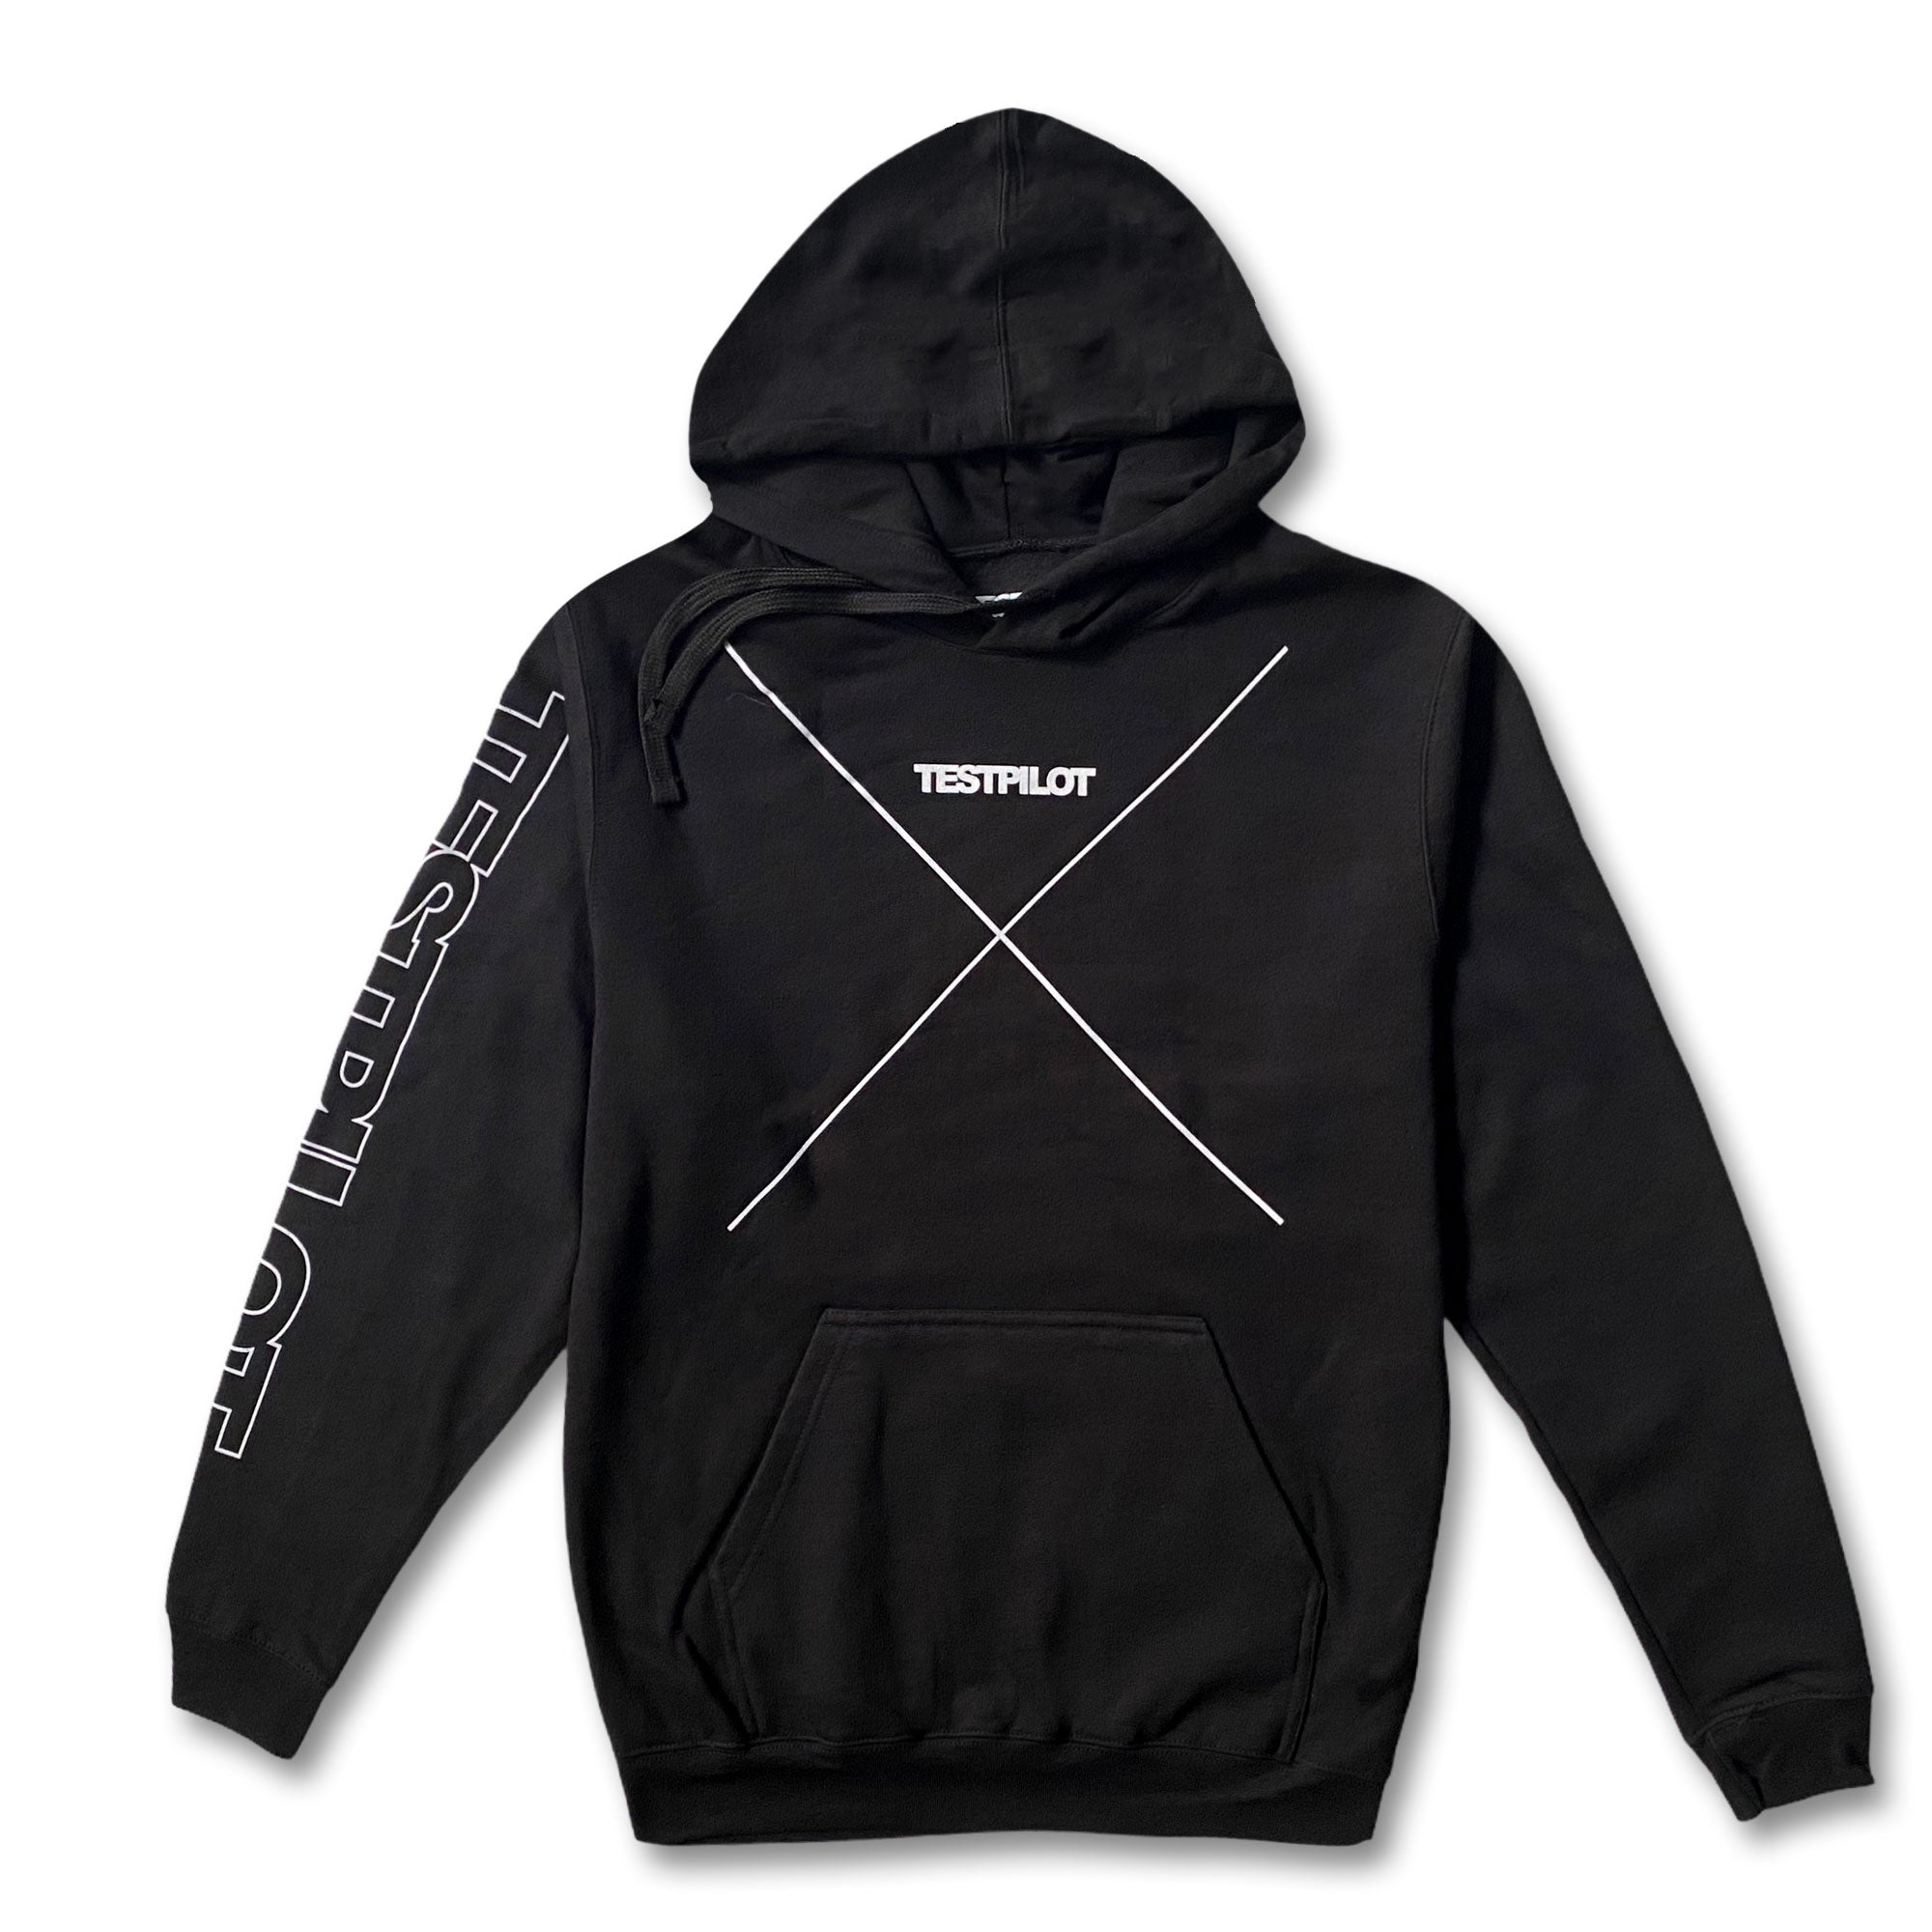 Testpilot - place pullover hoodie